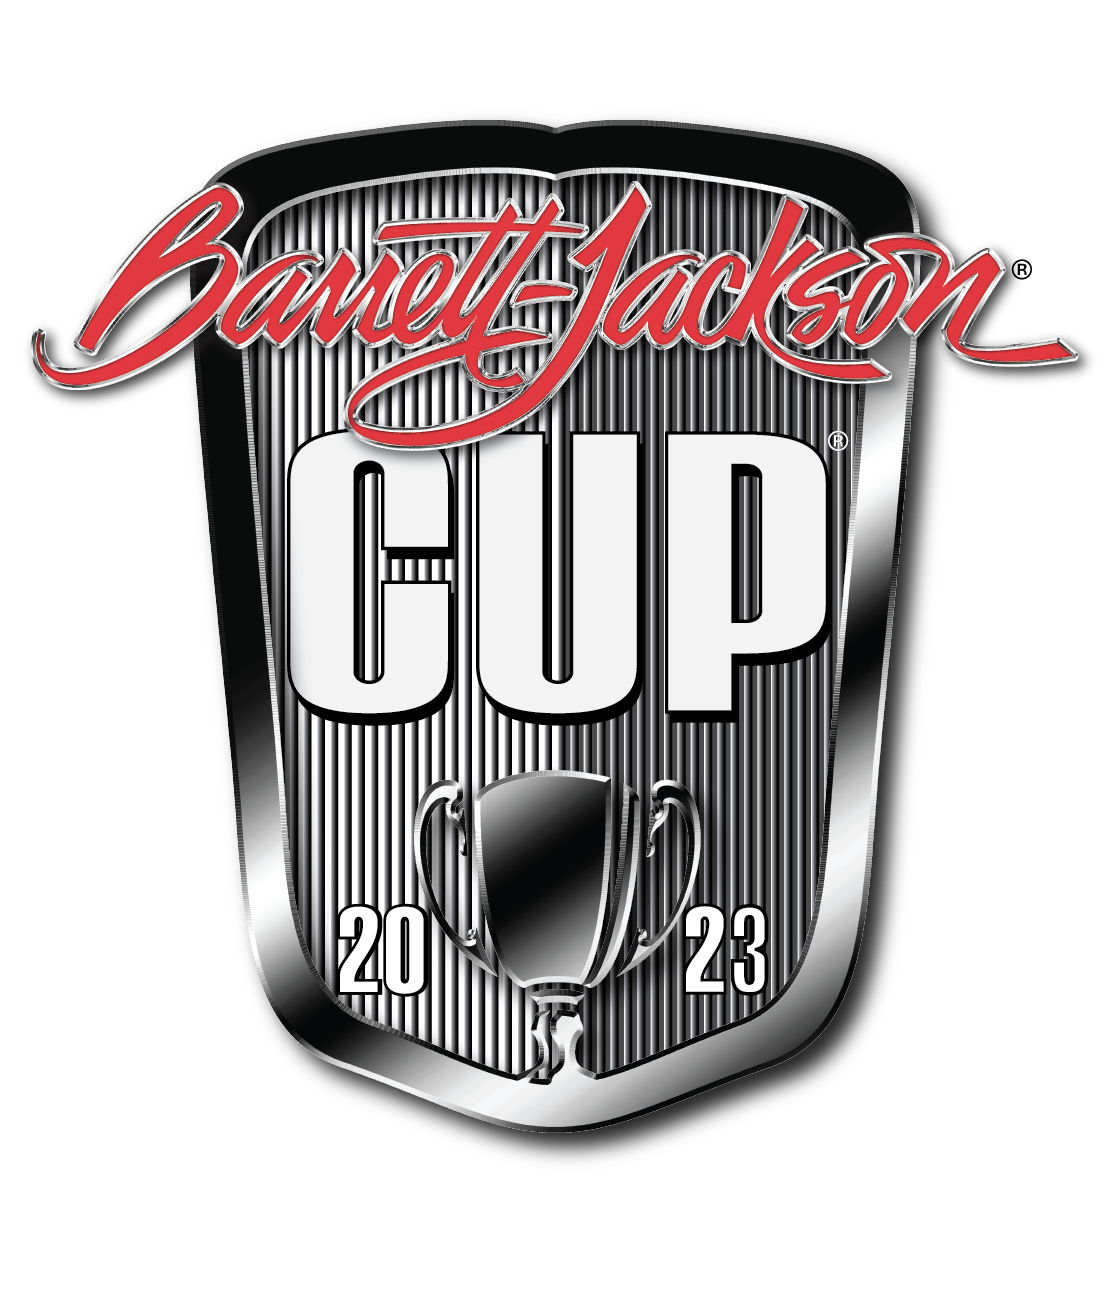 The Barrett-Jackson Cup now accepting applications for 2023 Scottsdale custom car competition